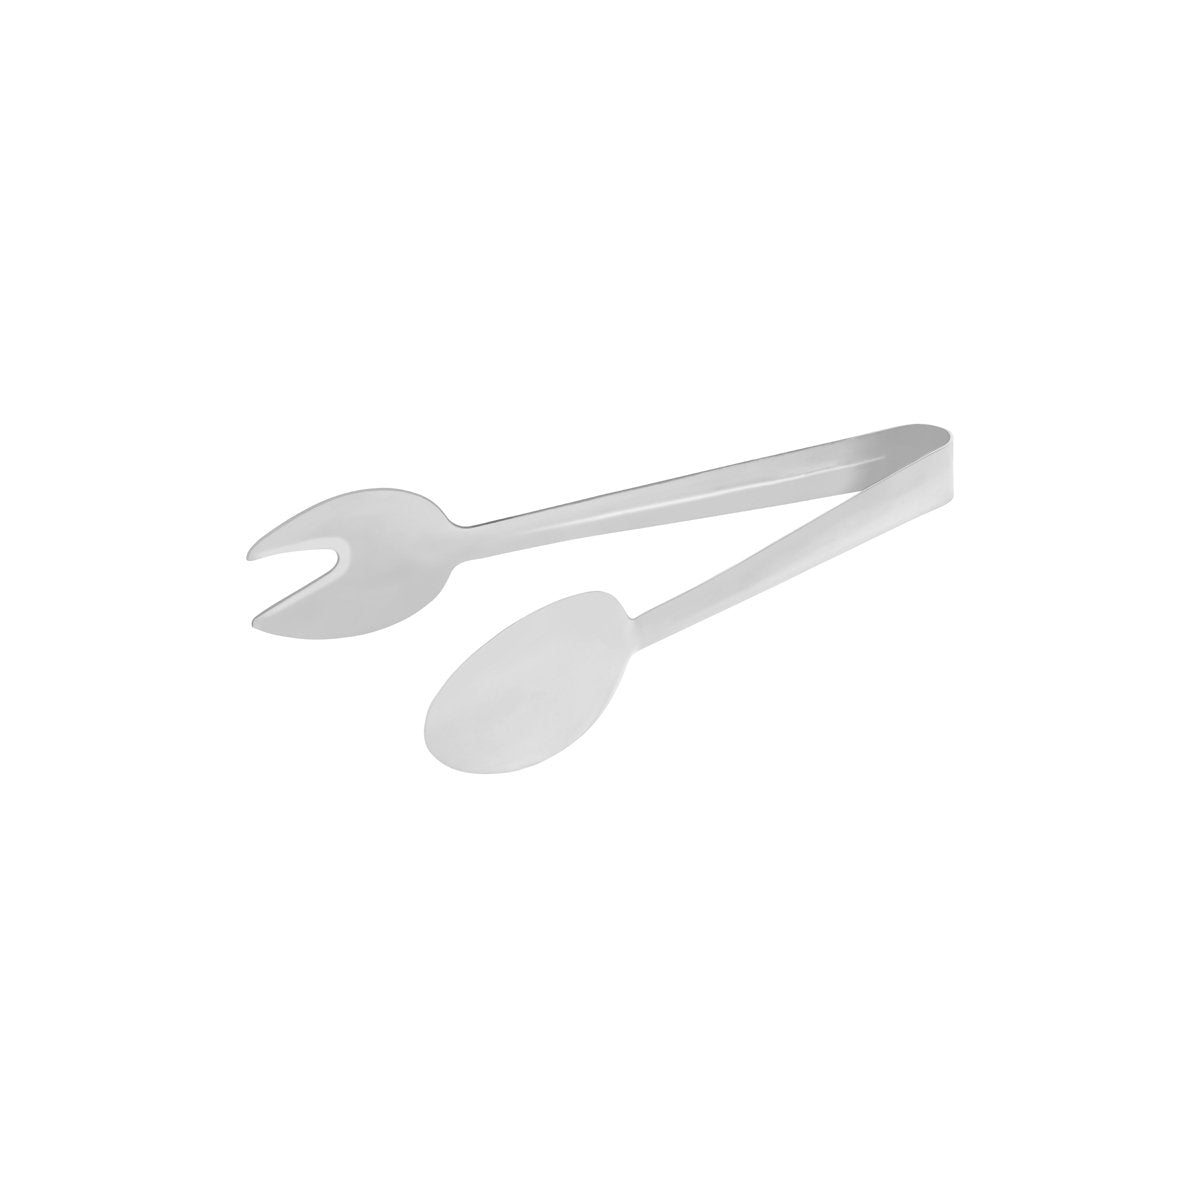 70276 Chef Inox Tong Round Spoon Fork One Piece 240mm Tomkin Australia Hospitality Supplies